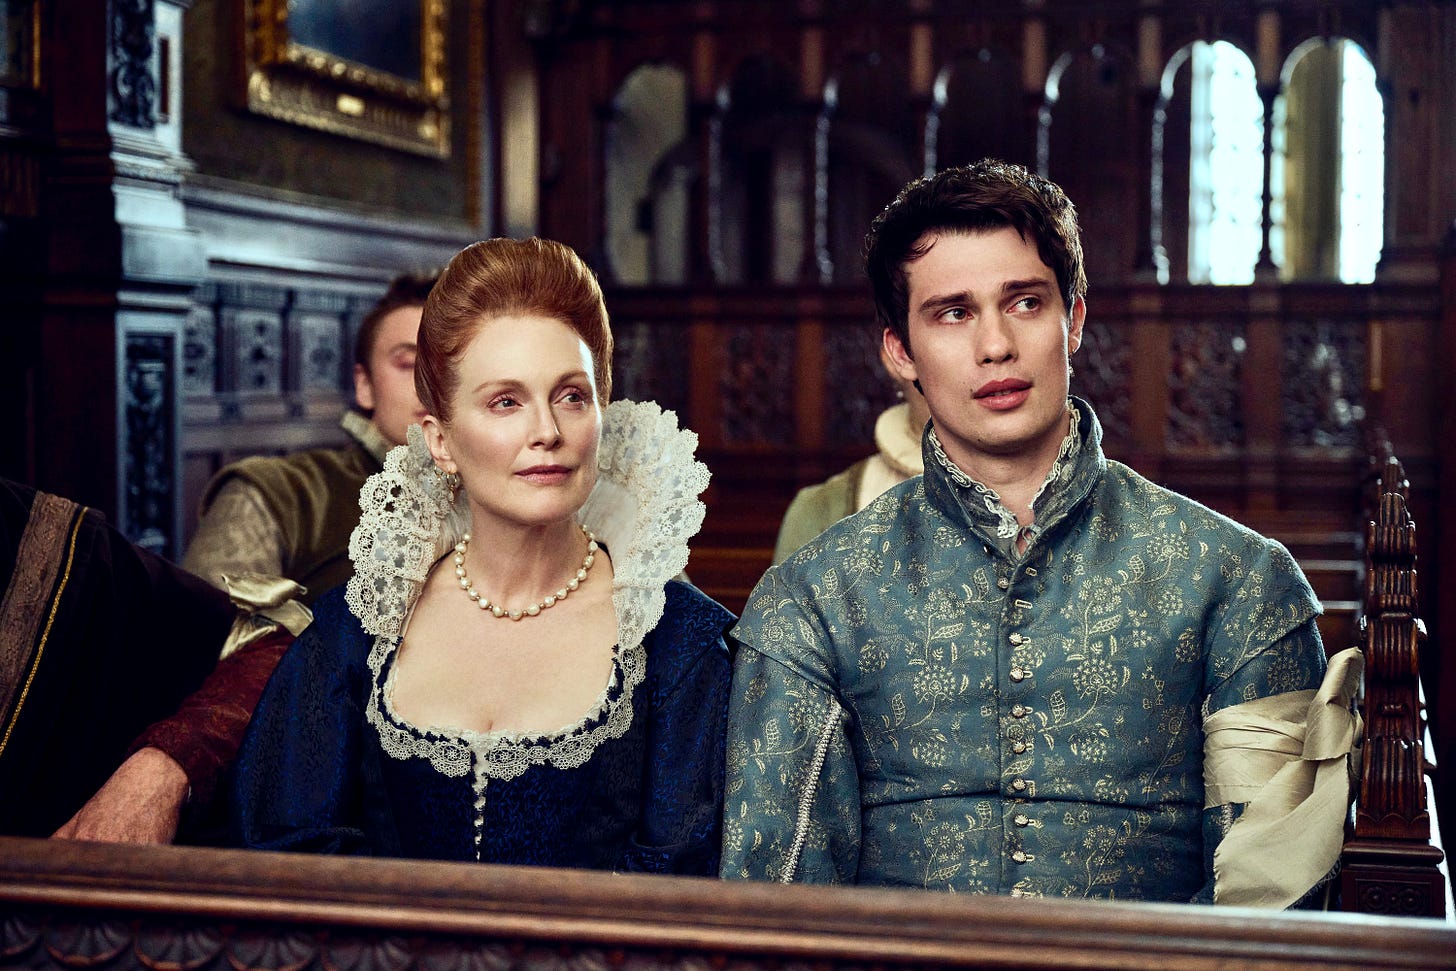 A mother and son in Jacobean costume